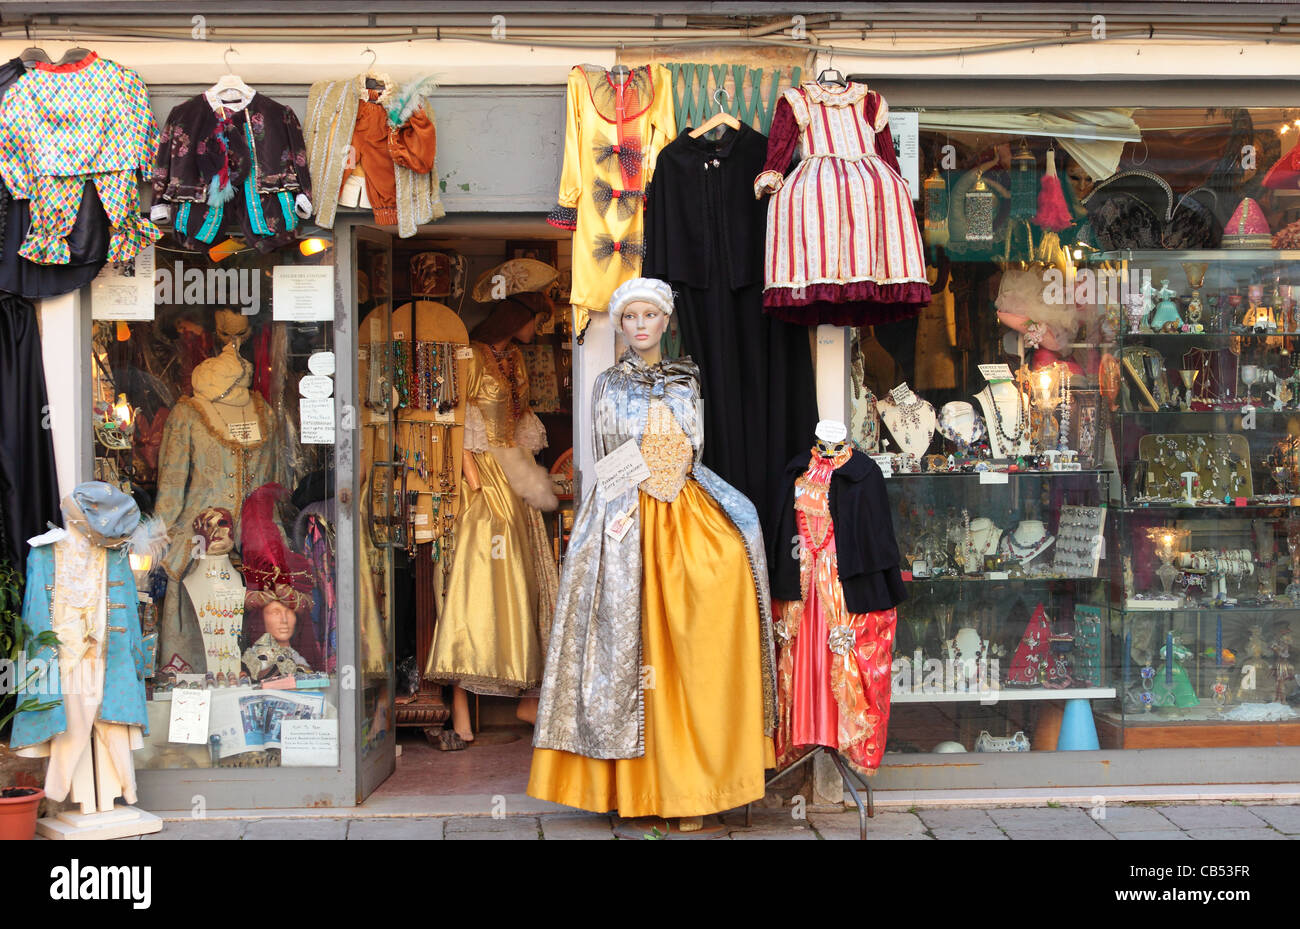 A shop in Venice selling tourist souvenirs and costumes for the famous and spectacular annual Carnevale celebration Stock Photo